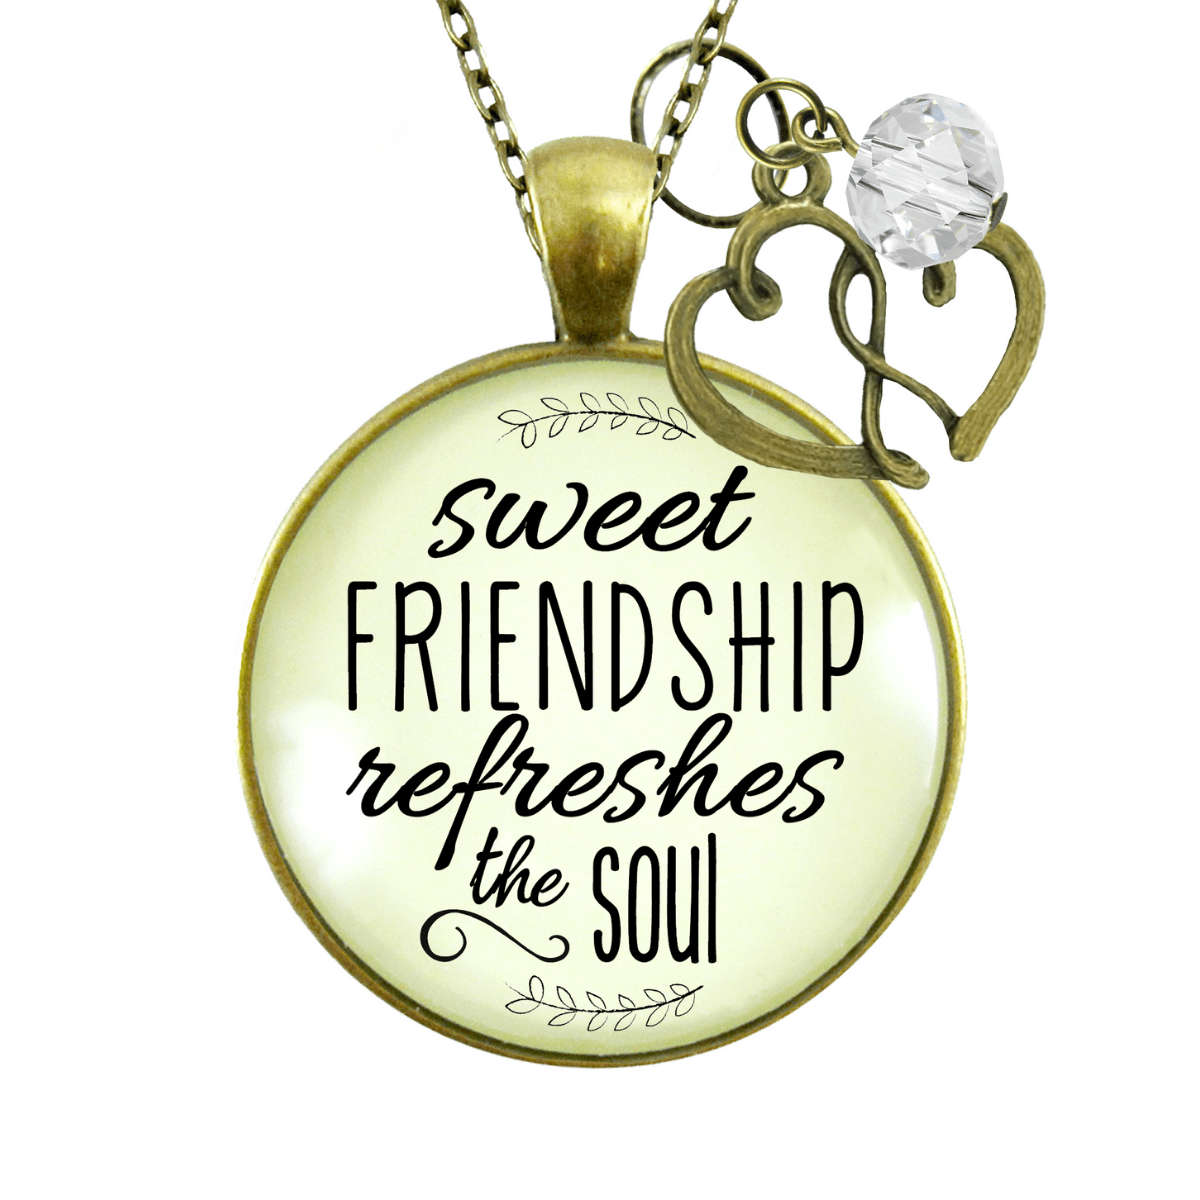 Gutsy Goodness Friendship Necklace Sweet Refreshes Soul Faith Life Quote Jewelry - Gutsy Goodness Handmade Jewelry;Friendship Necklace Sweet Refreshes Soul Faith Life Quote Jewelry - Gutsy Goodness Handmade Jewelry Gifts